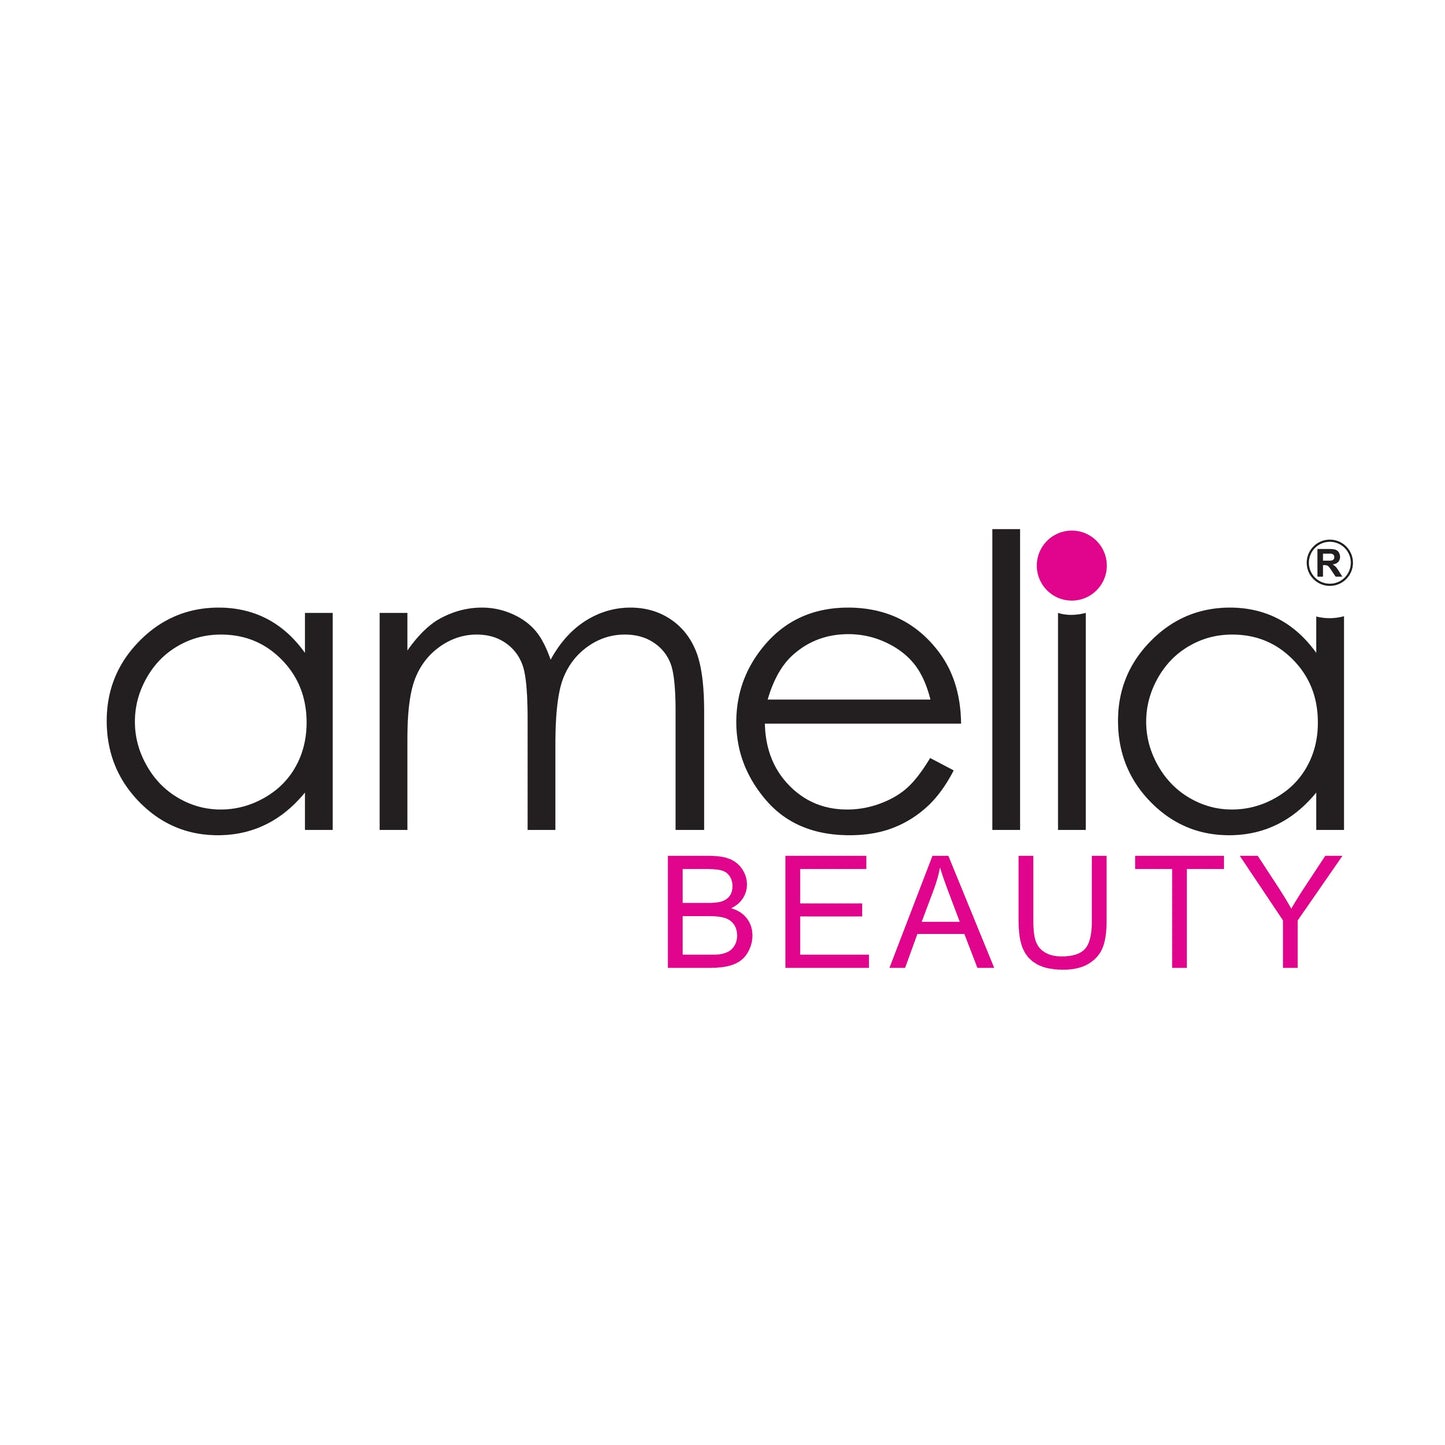 Amelia Beauty Products 8 Medium Elastic Hair Coils, 2.0in Diameter Thick Spiral Hair Ties, Gentle on Hair, Strong Hold and Minimizes Dents and Creases, Red, White and Green Mix